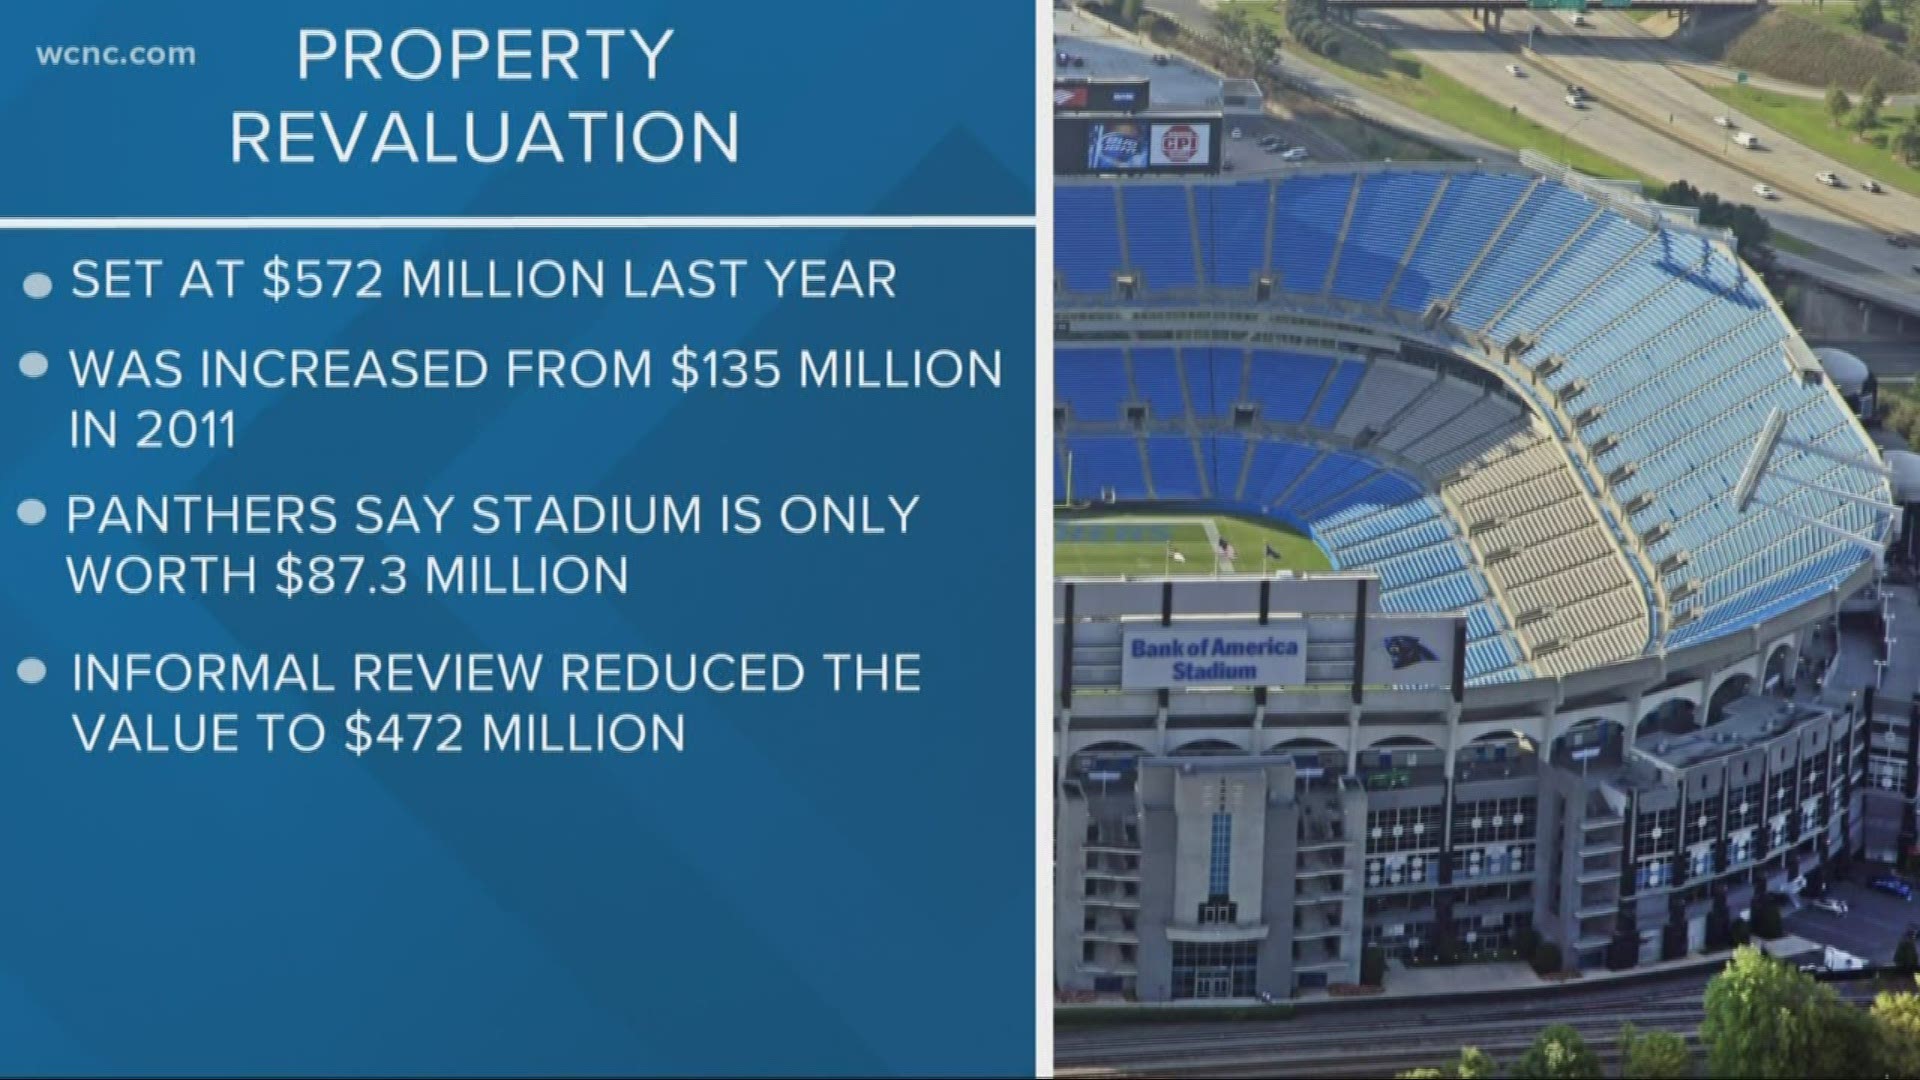 Officials with the Carolina Panthers met with county leaders to get Bank of America Stadium's tax value reduced after property revaluations in 2019.